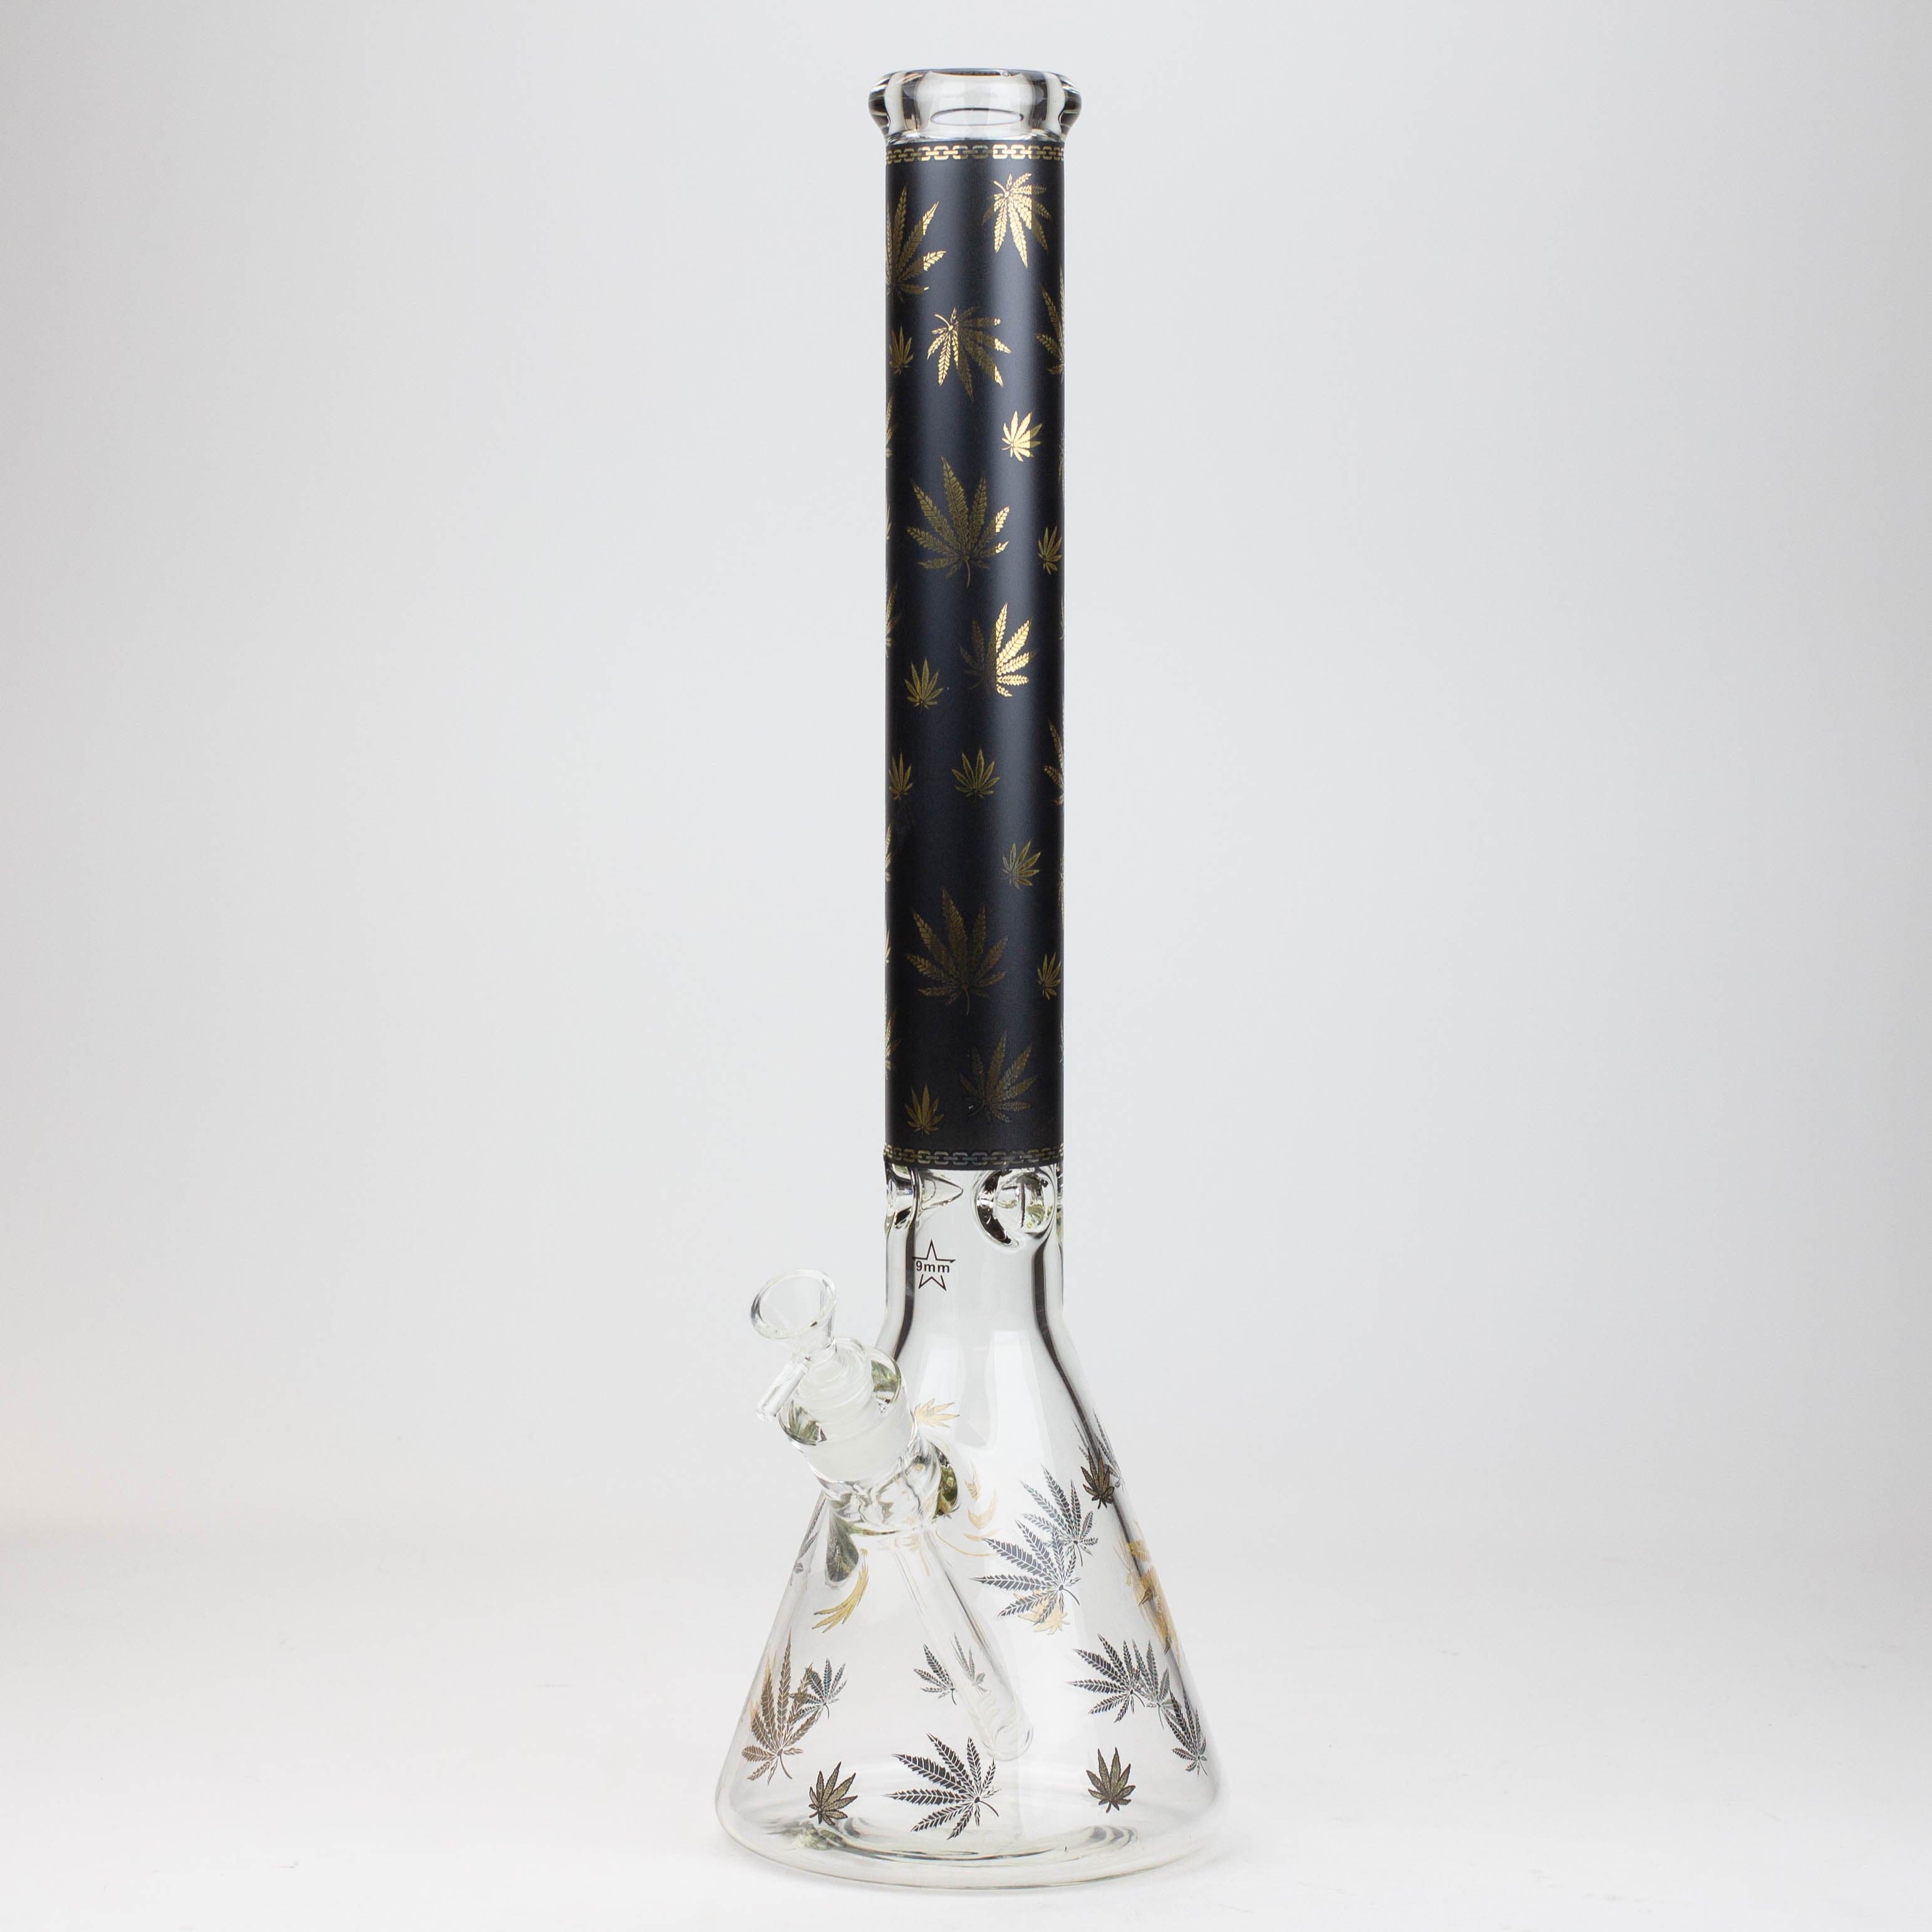 Gold leaf 9 mm glass water pipes 19.5"_10